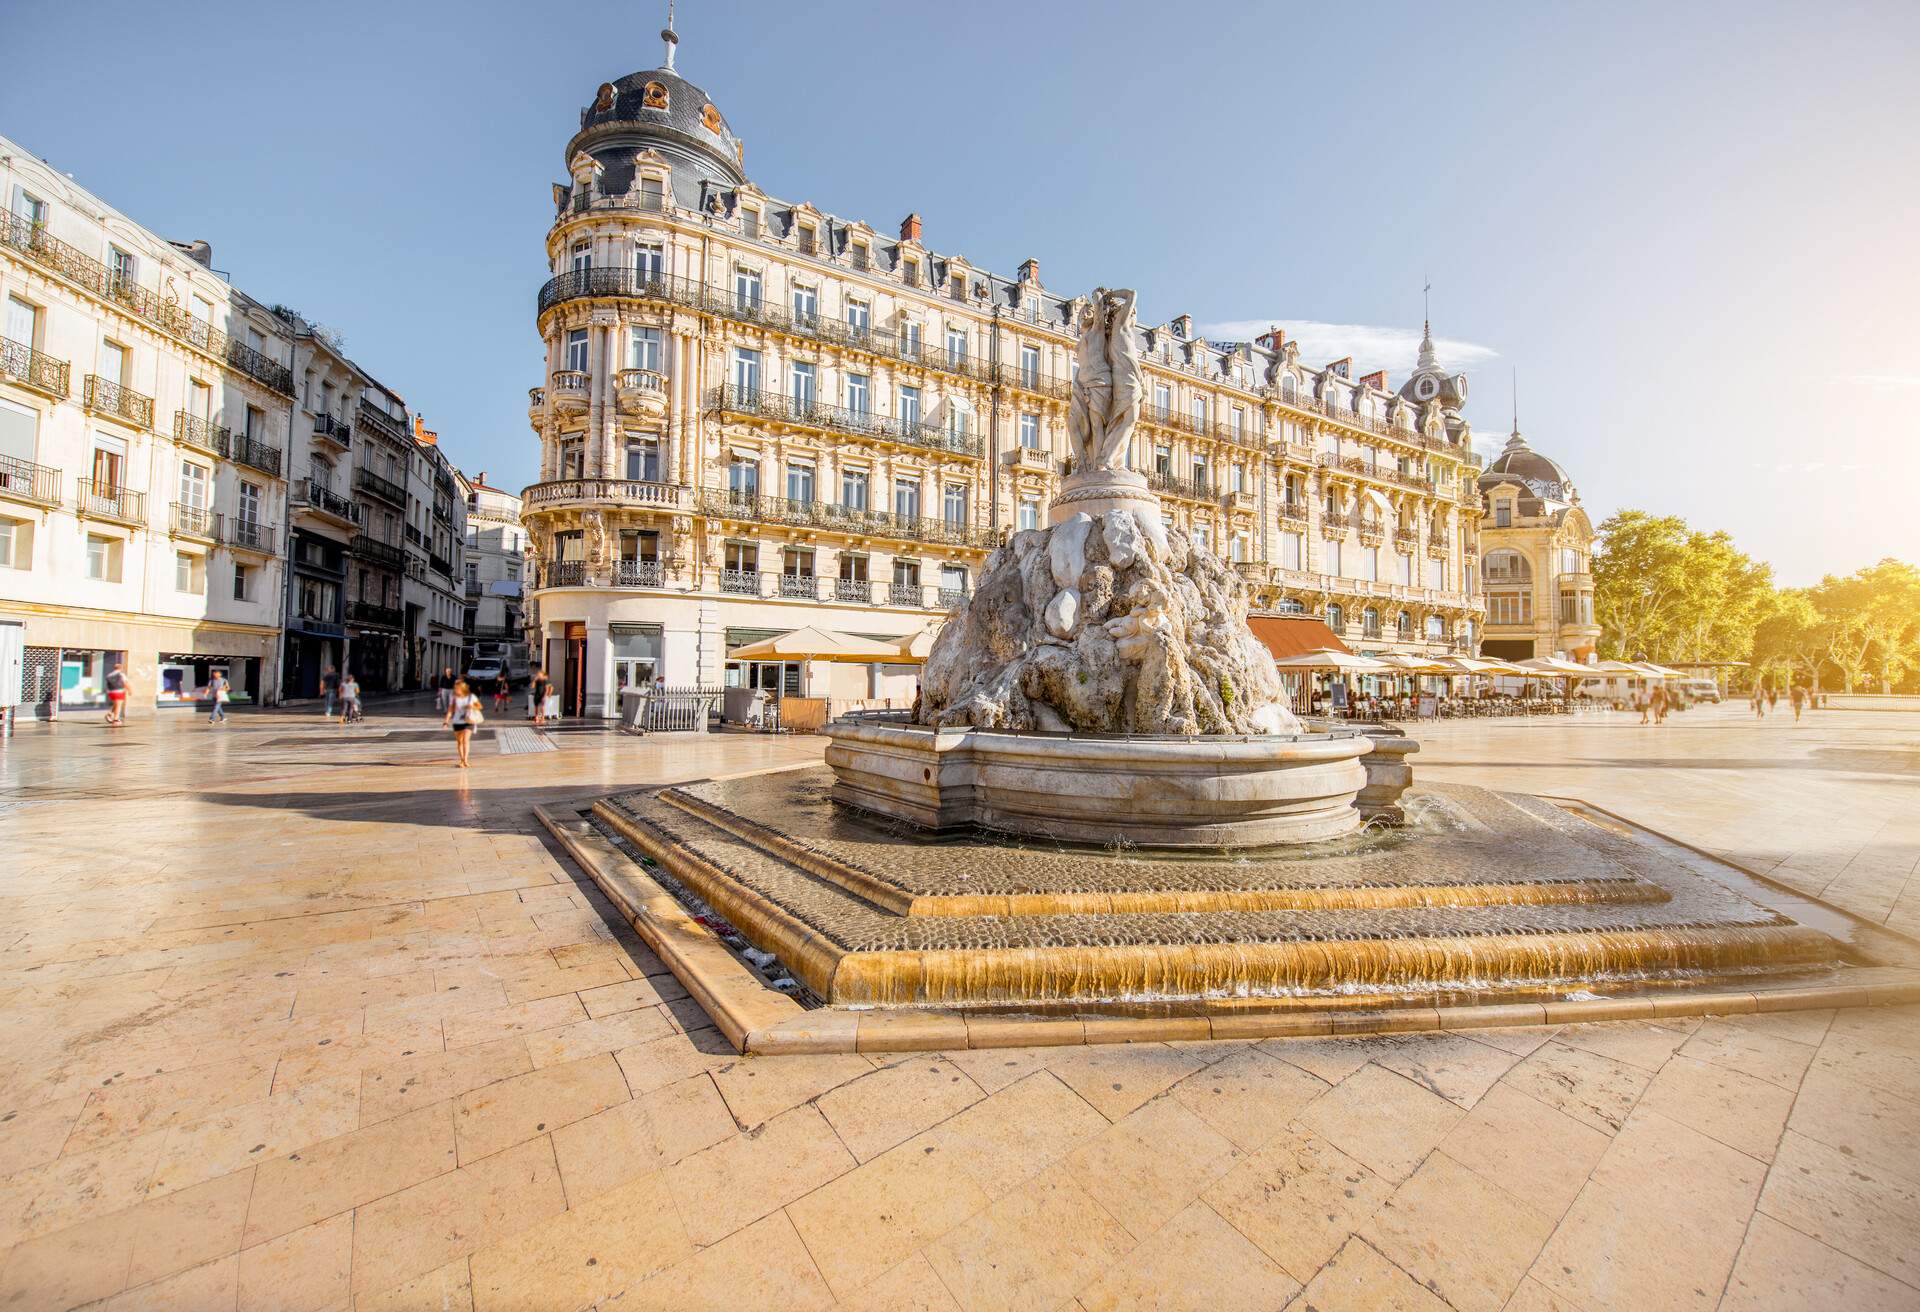 View on the Comedy square with fountain of Three Graces during the morning light in Montpellier city in southern France